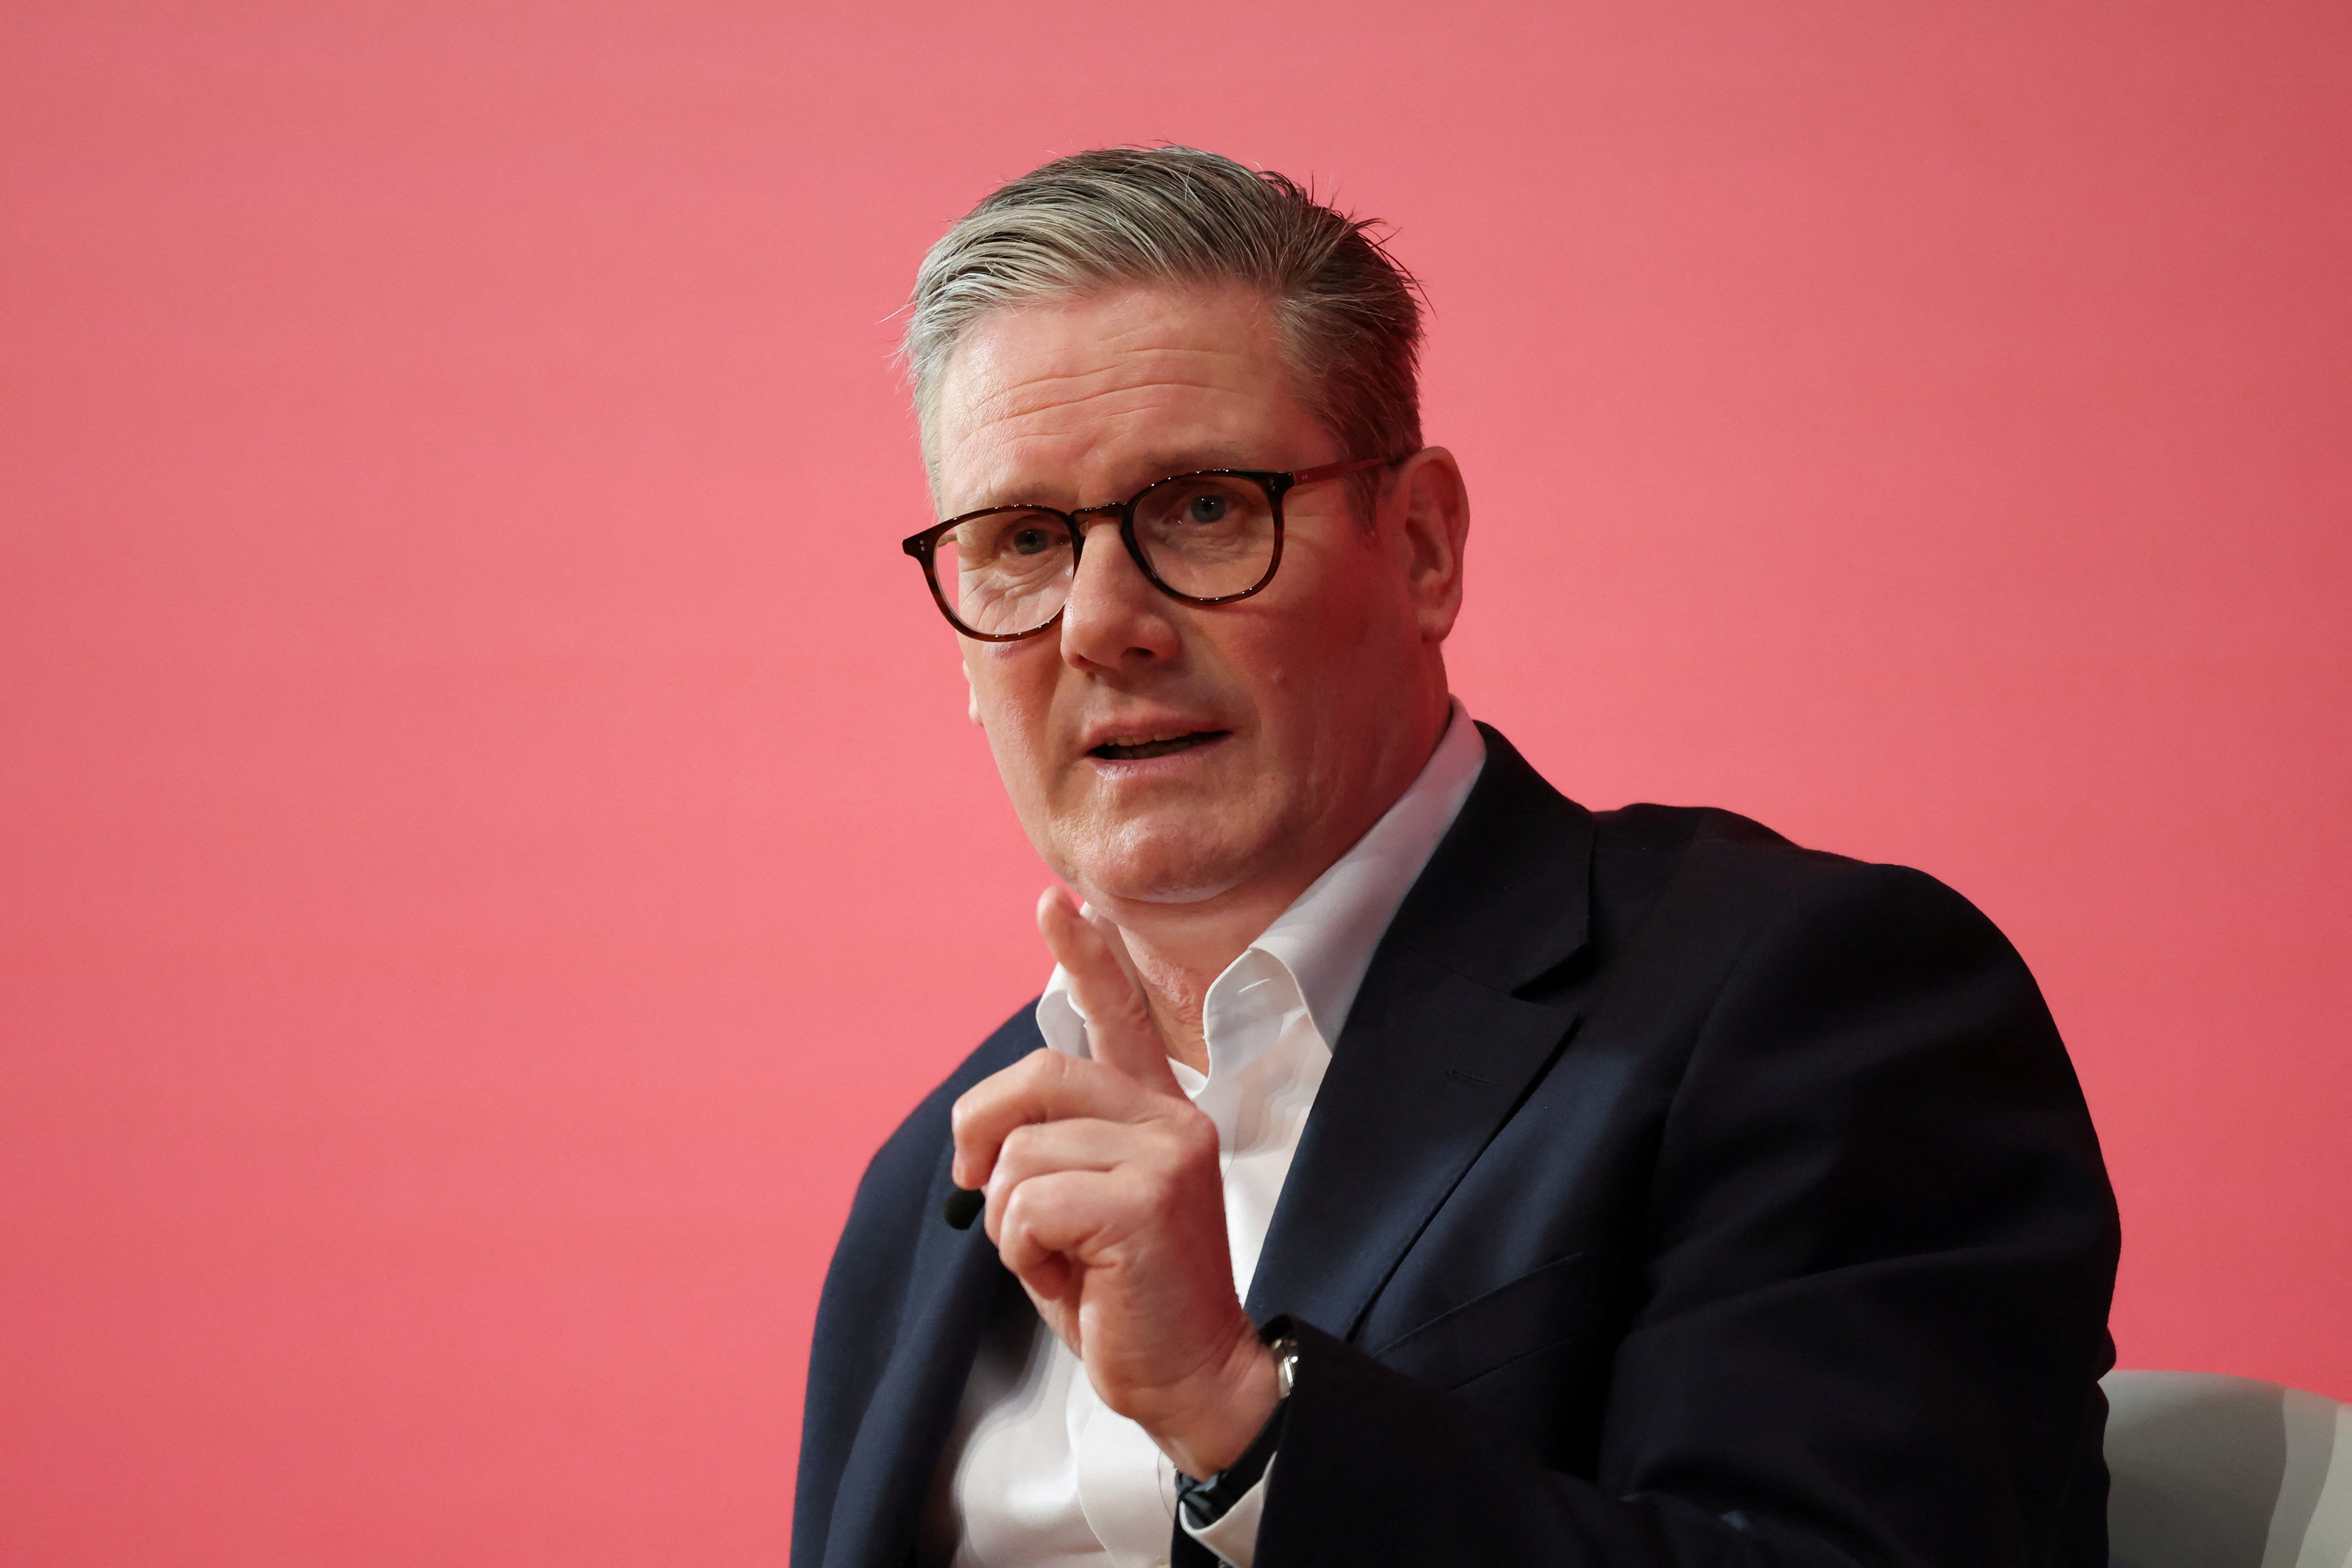 Keir Starmer said people should ‘butt out’ of princess’s business